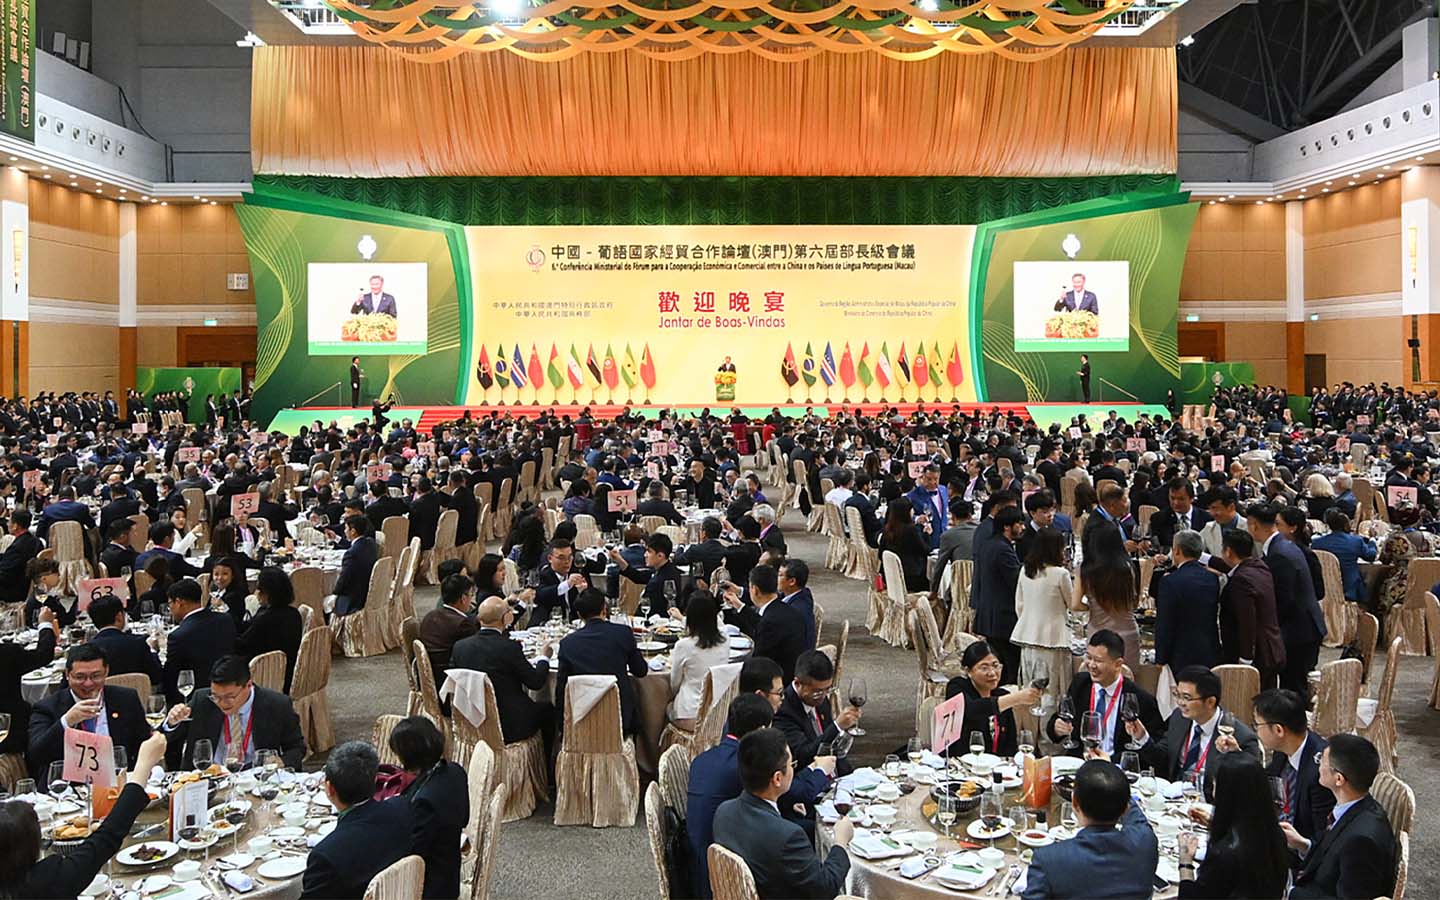 Delegates arrive for Forum Macao’s 6th ministerial conference